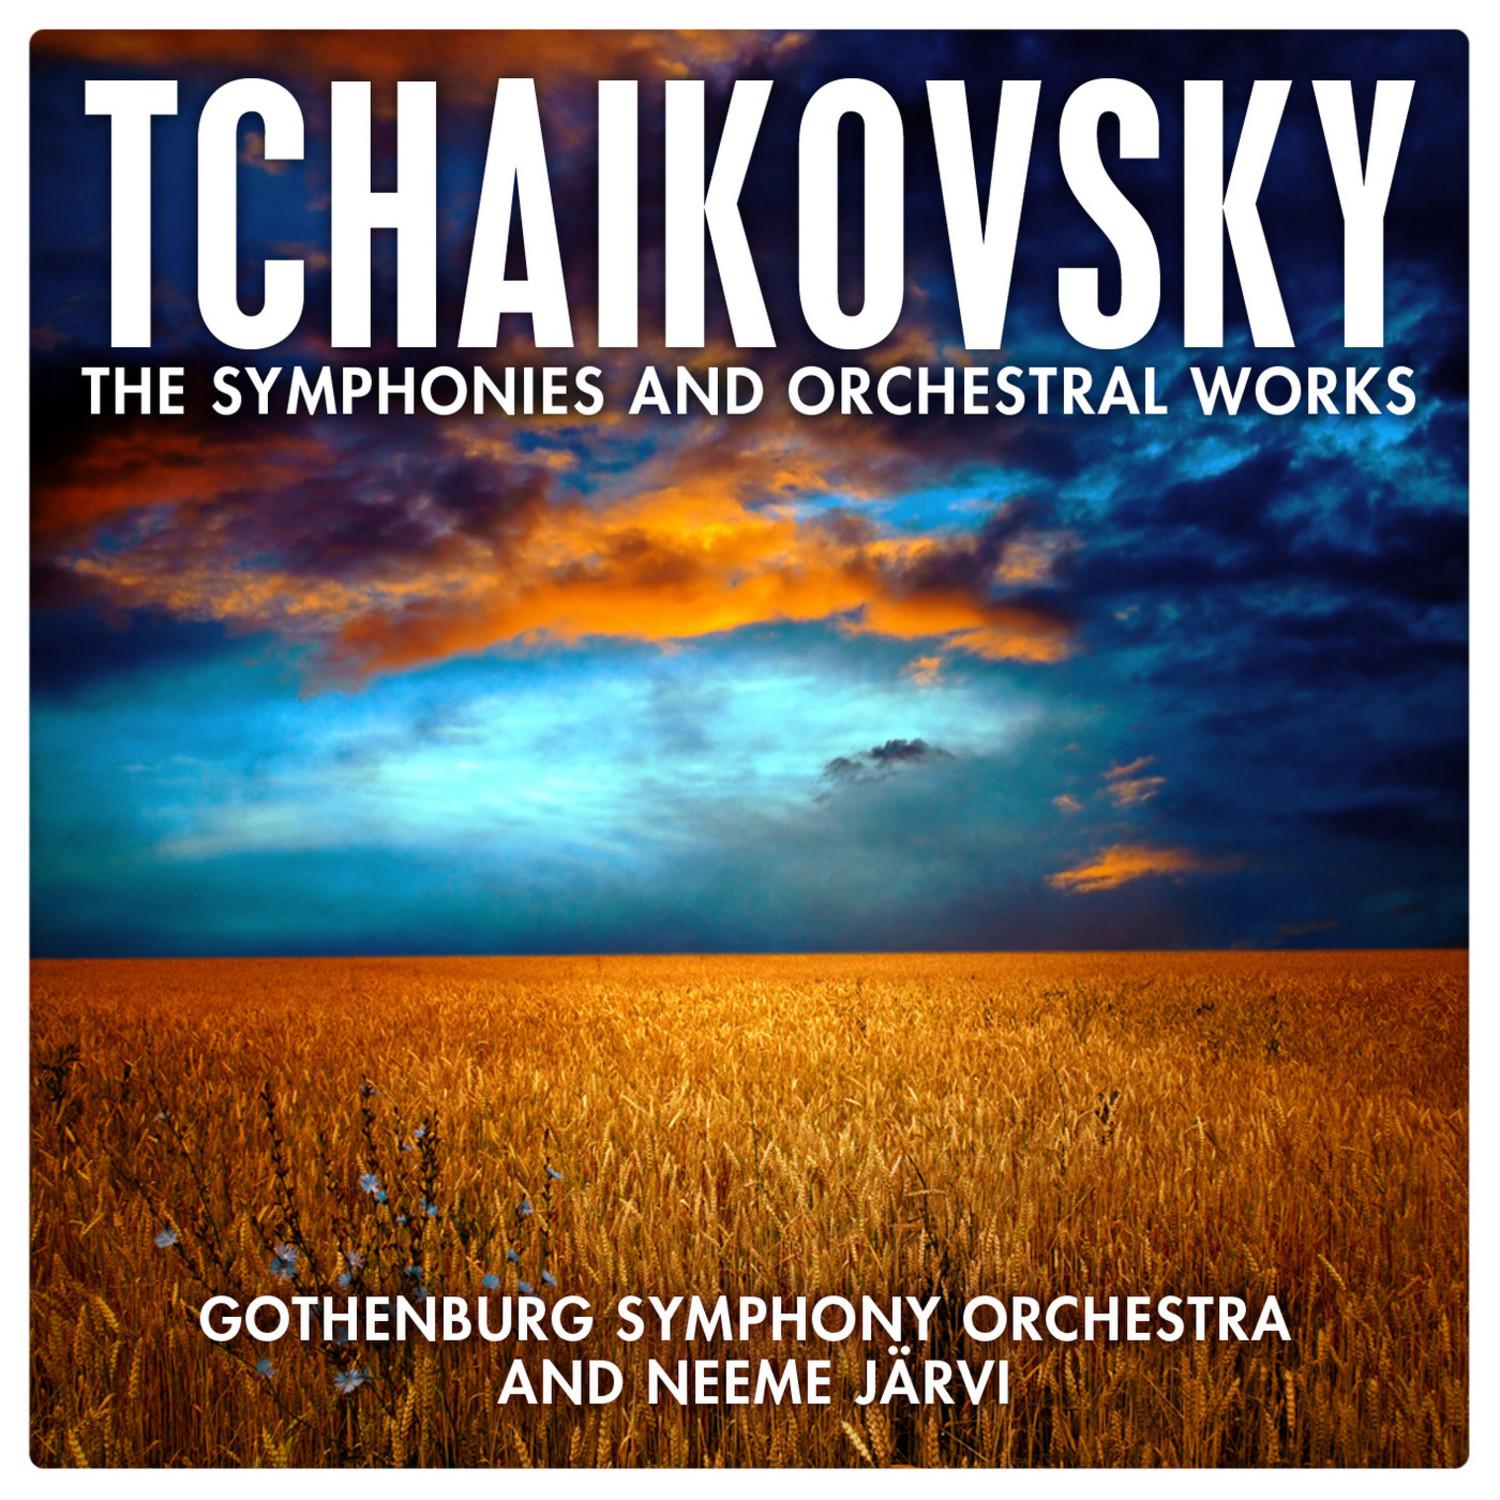 Tchaikovsky: The Symphonies and Orchestral Works